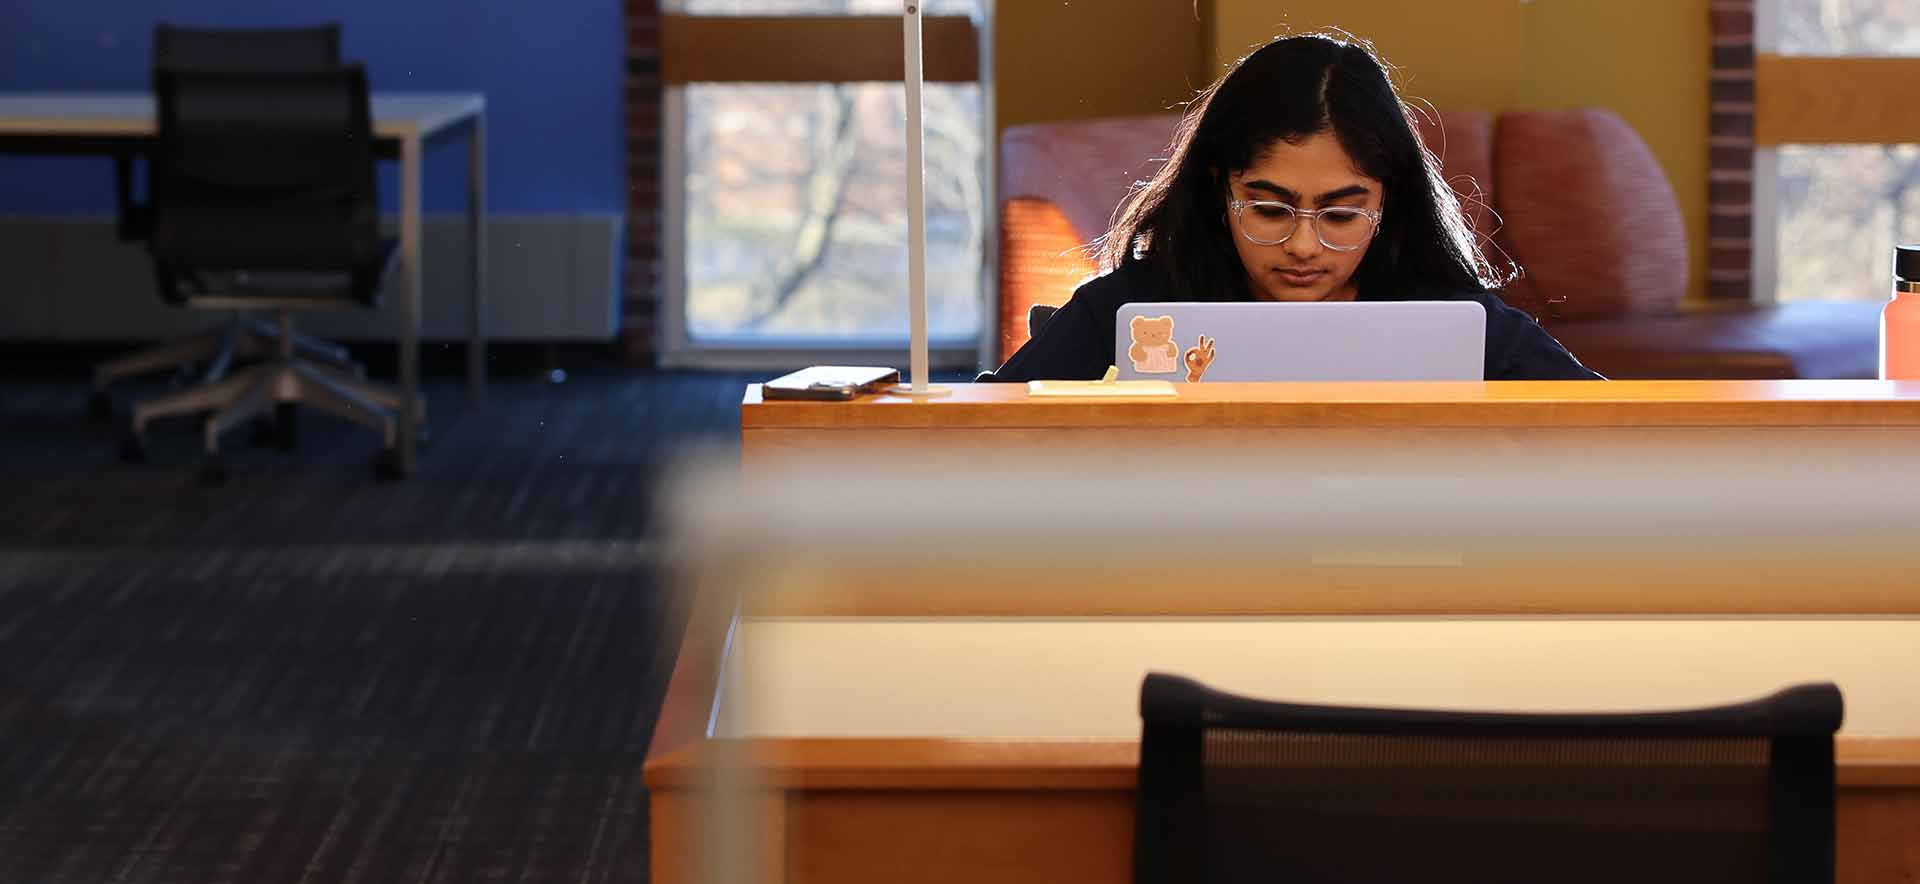 Brandeis students at a desk with computer